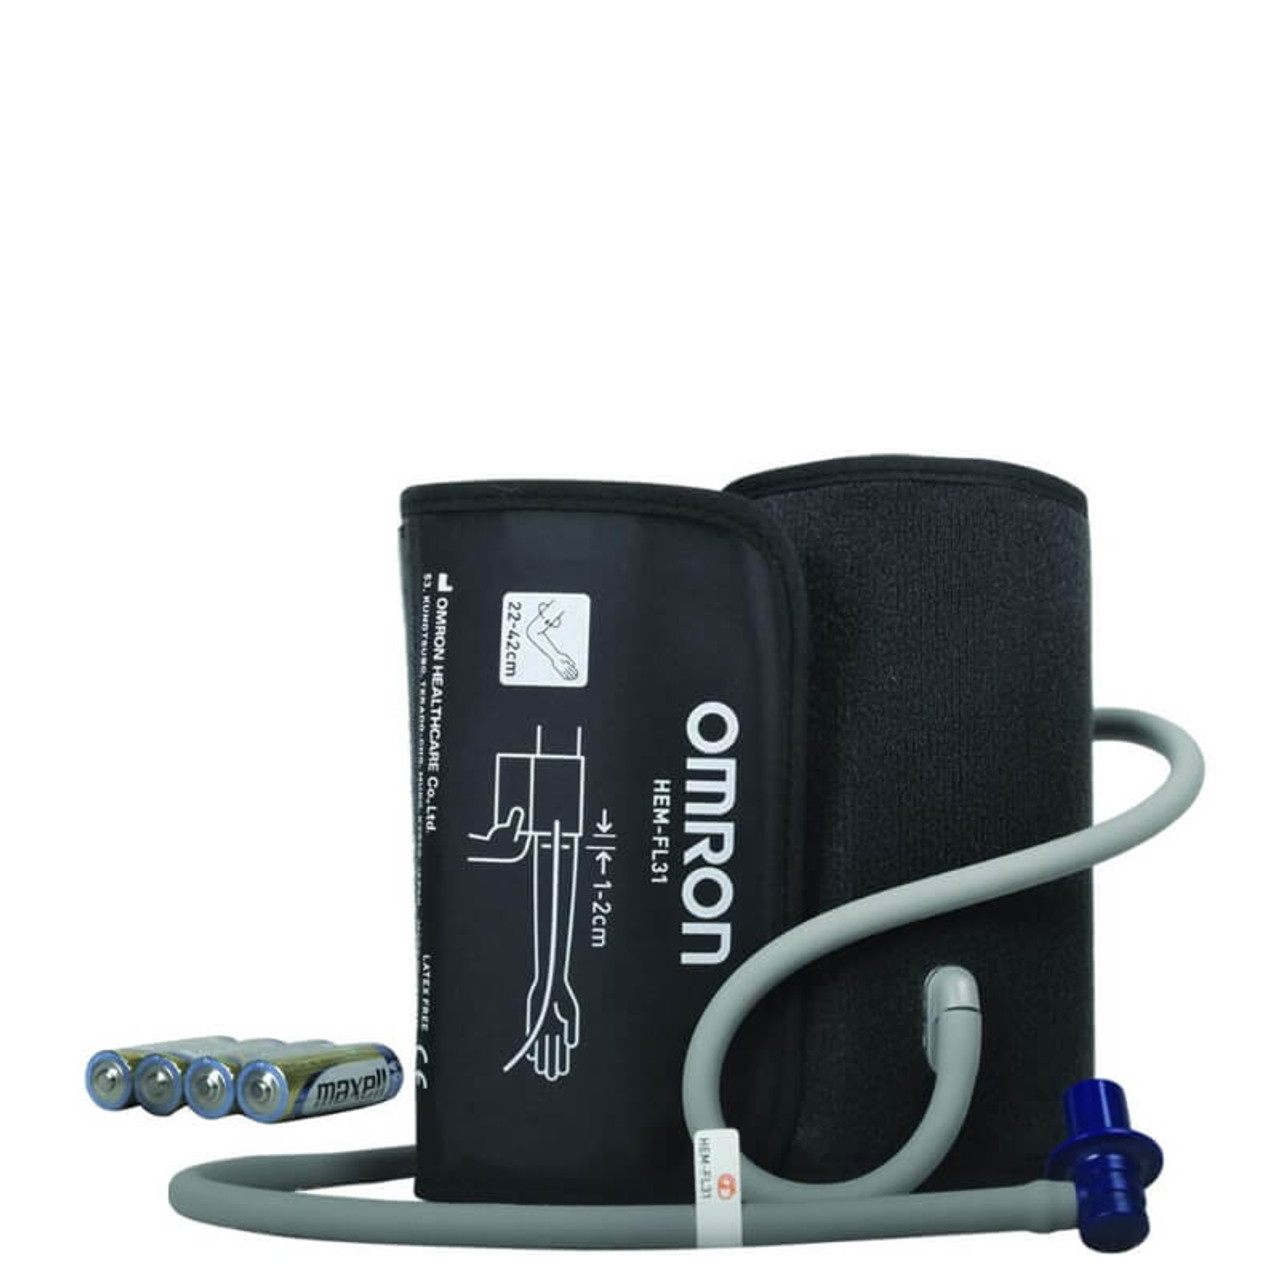 OMRON M3 Comfort Upper Arm Blood Pressure Monitor with Intelli Wrap Cuff